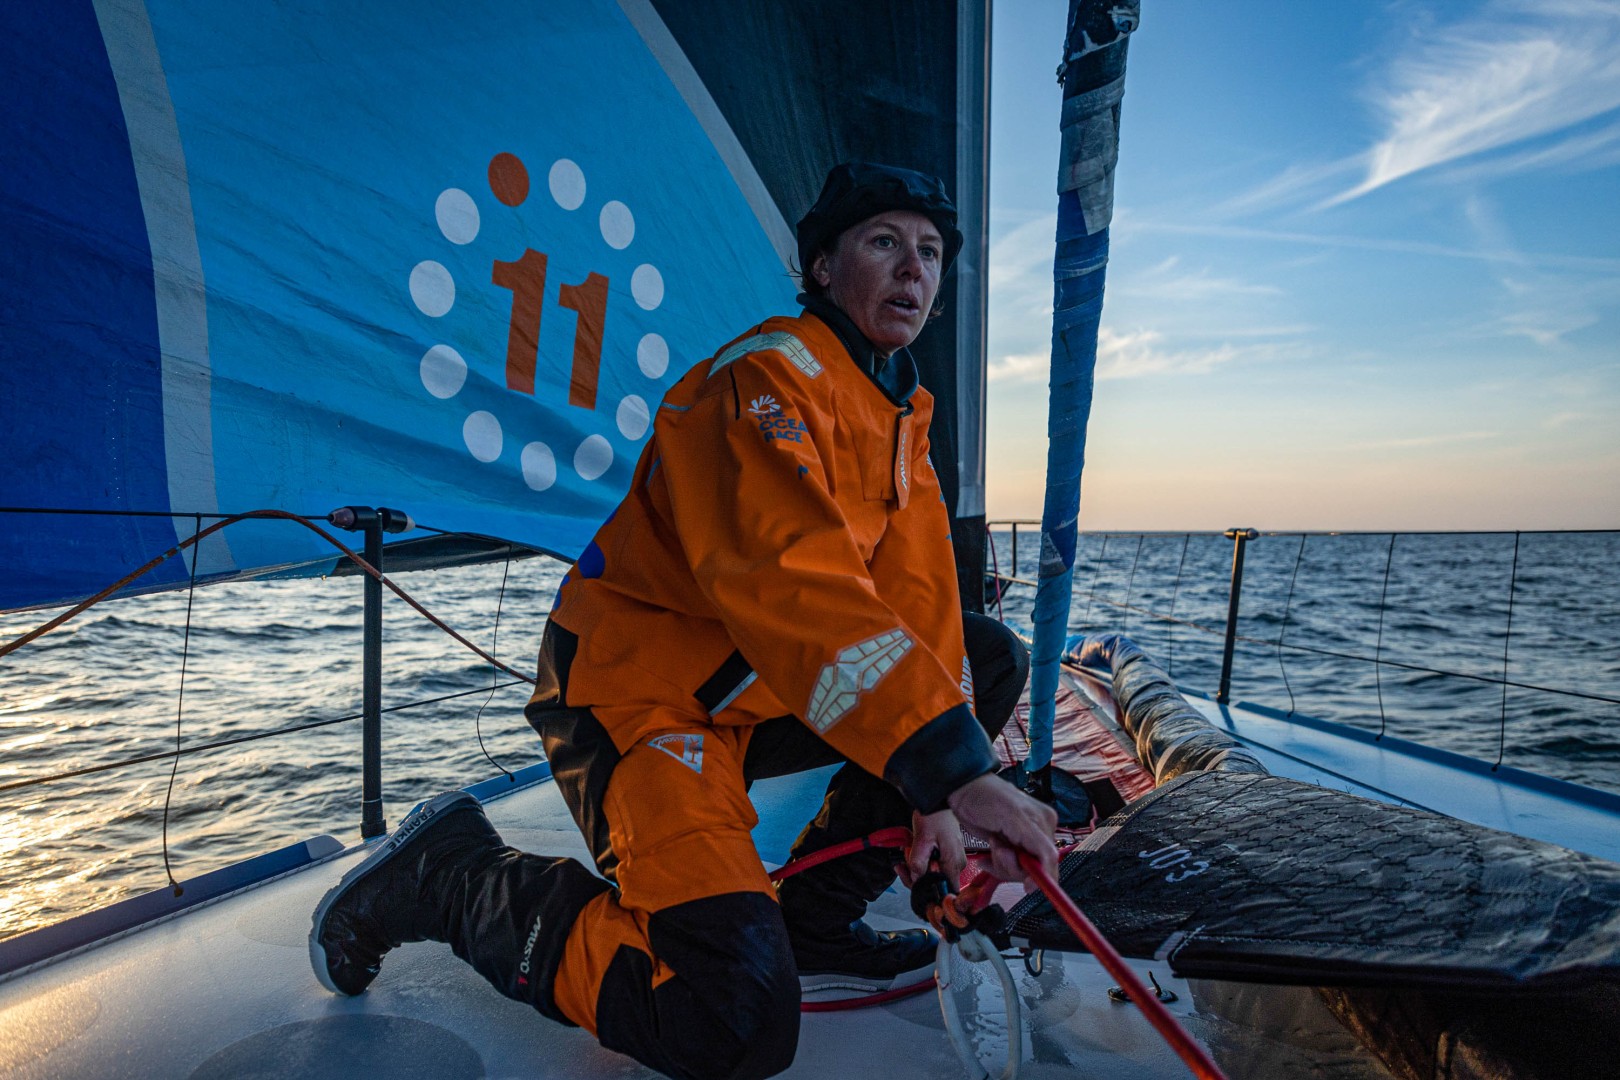 Leg 6 Day 1 onboard 11th Hour Racing Team. Francesca Clapcich on deck for a sail change.
© Pierre Bouras